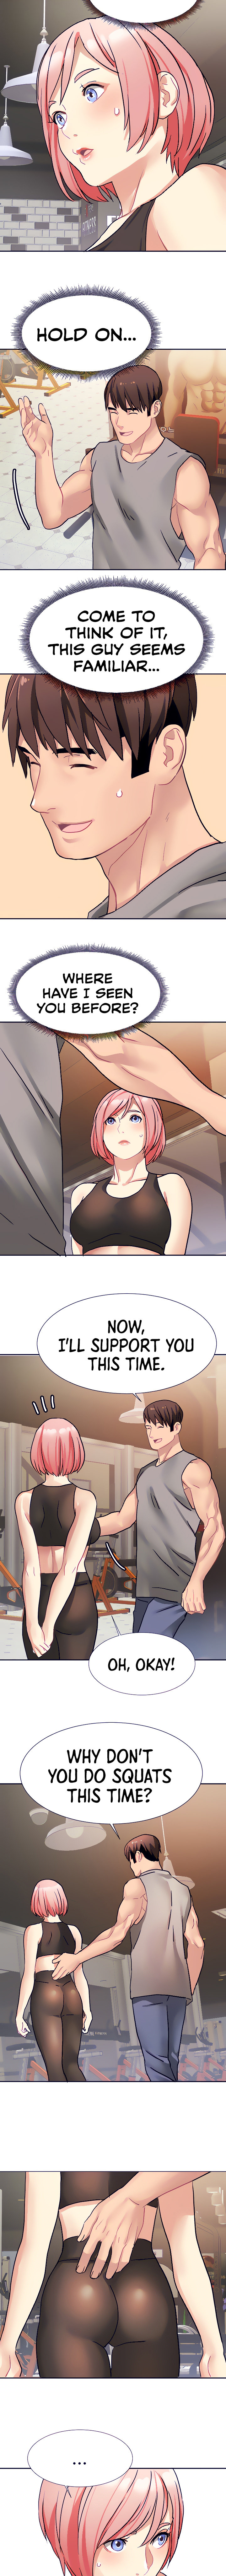 Punishments for Bad Girls - Chapter 19 Page 8